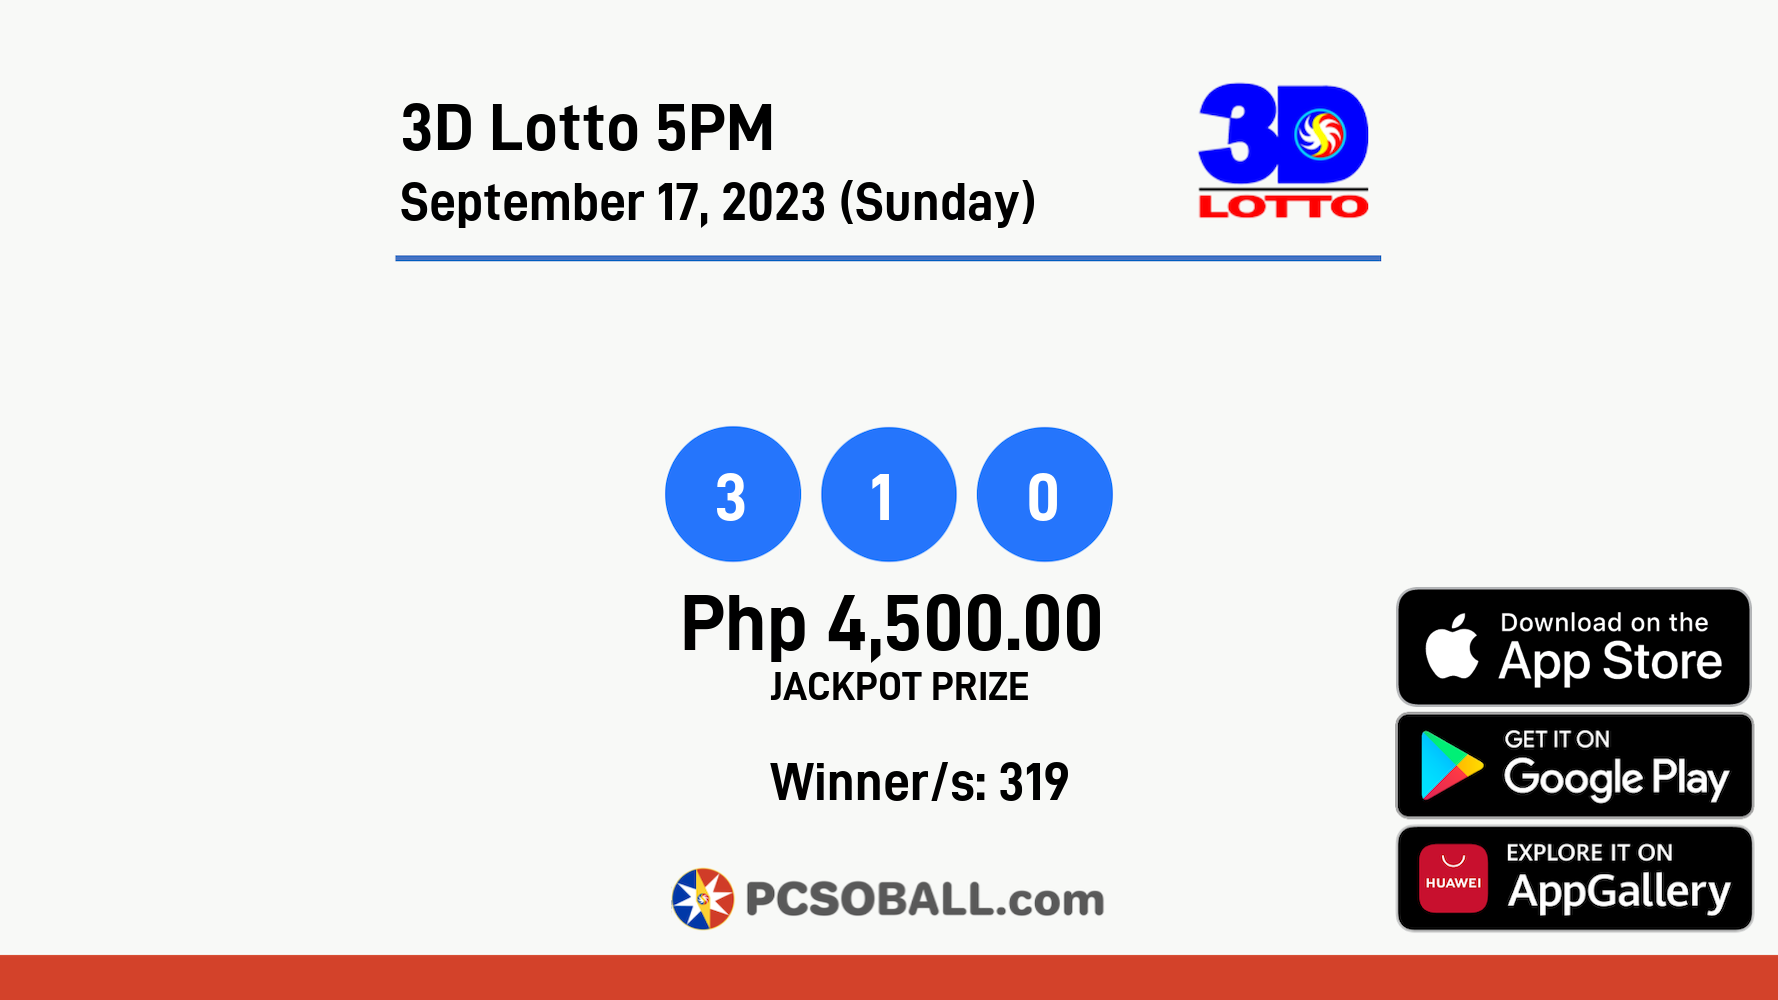 3D Lotto 5PM September 17, 2023 (Sunday) Result